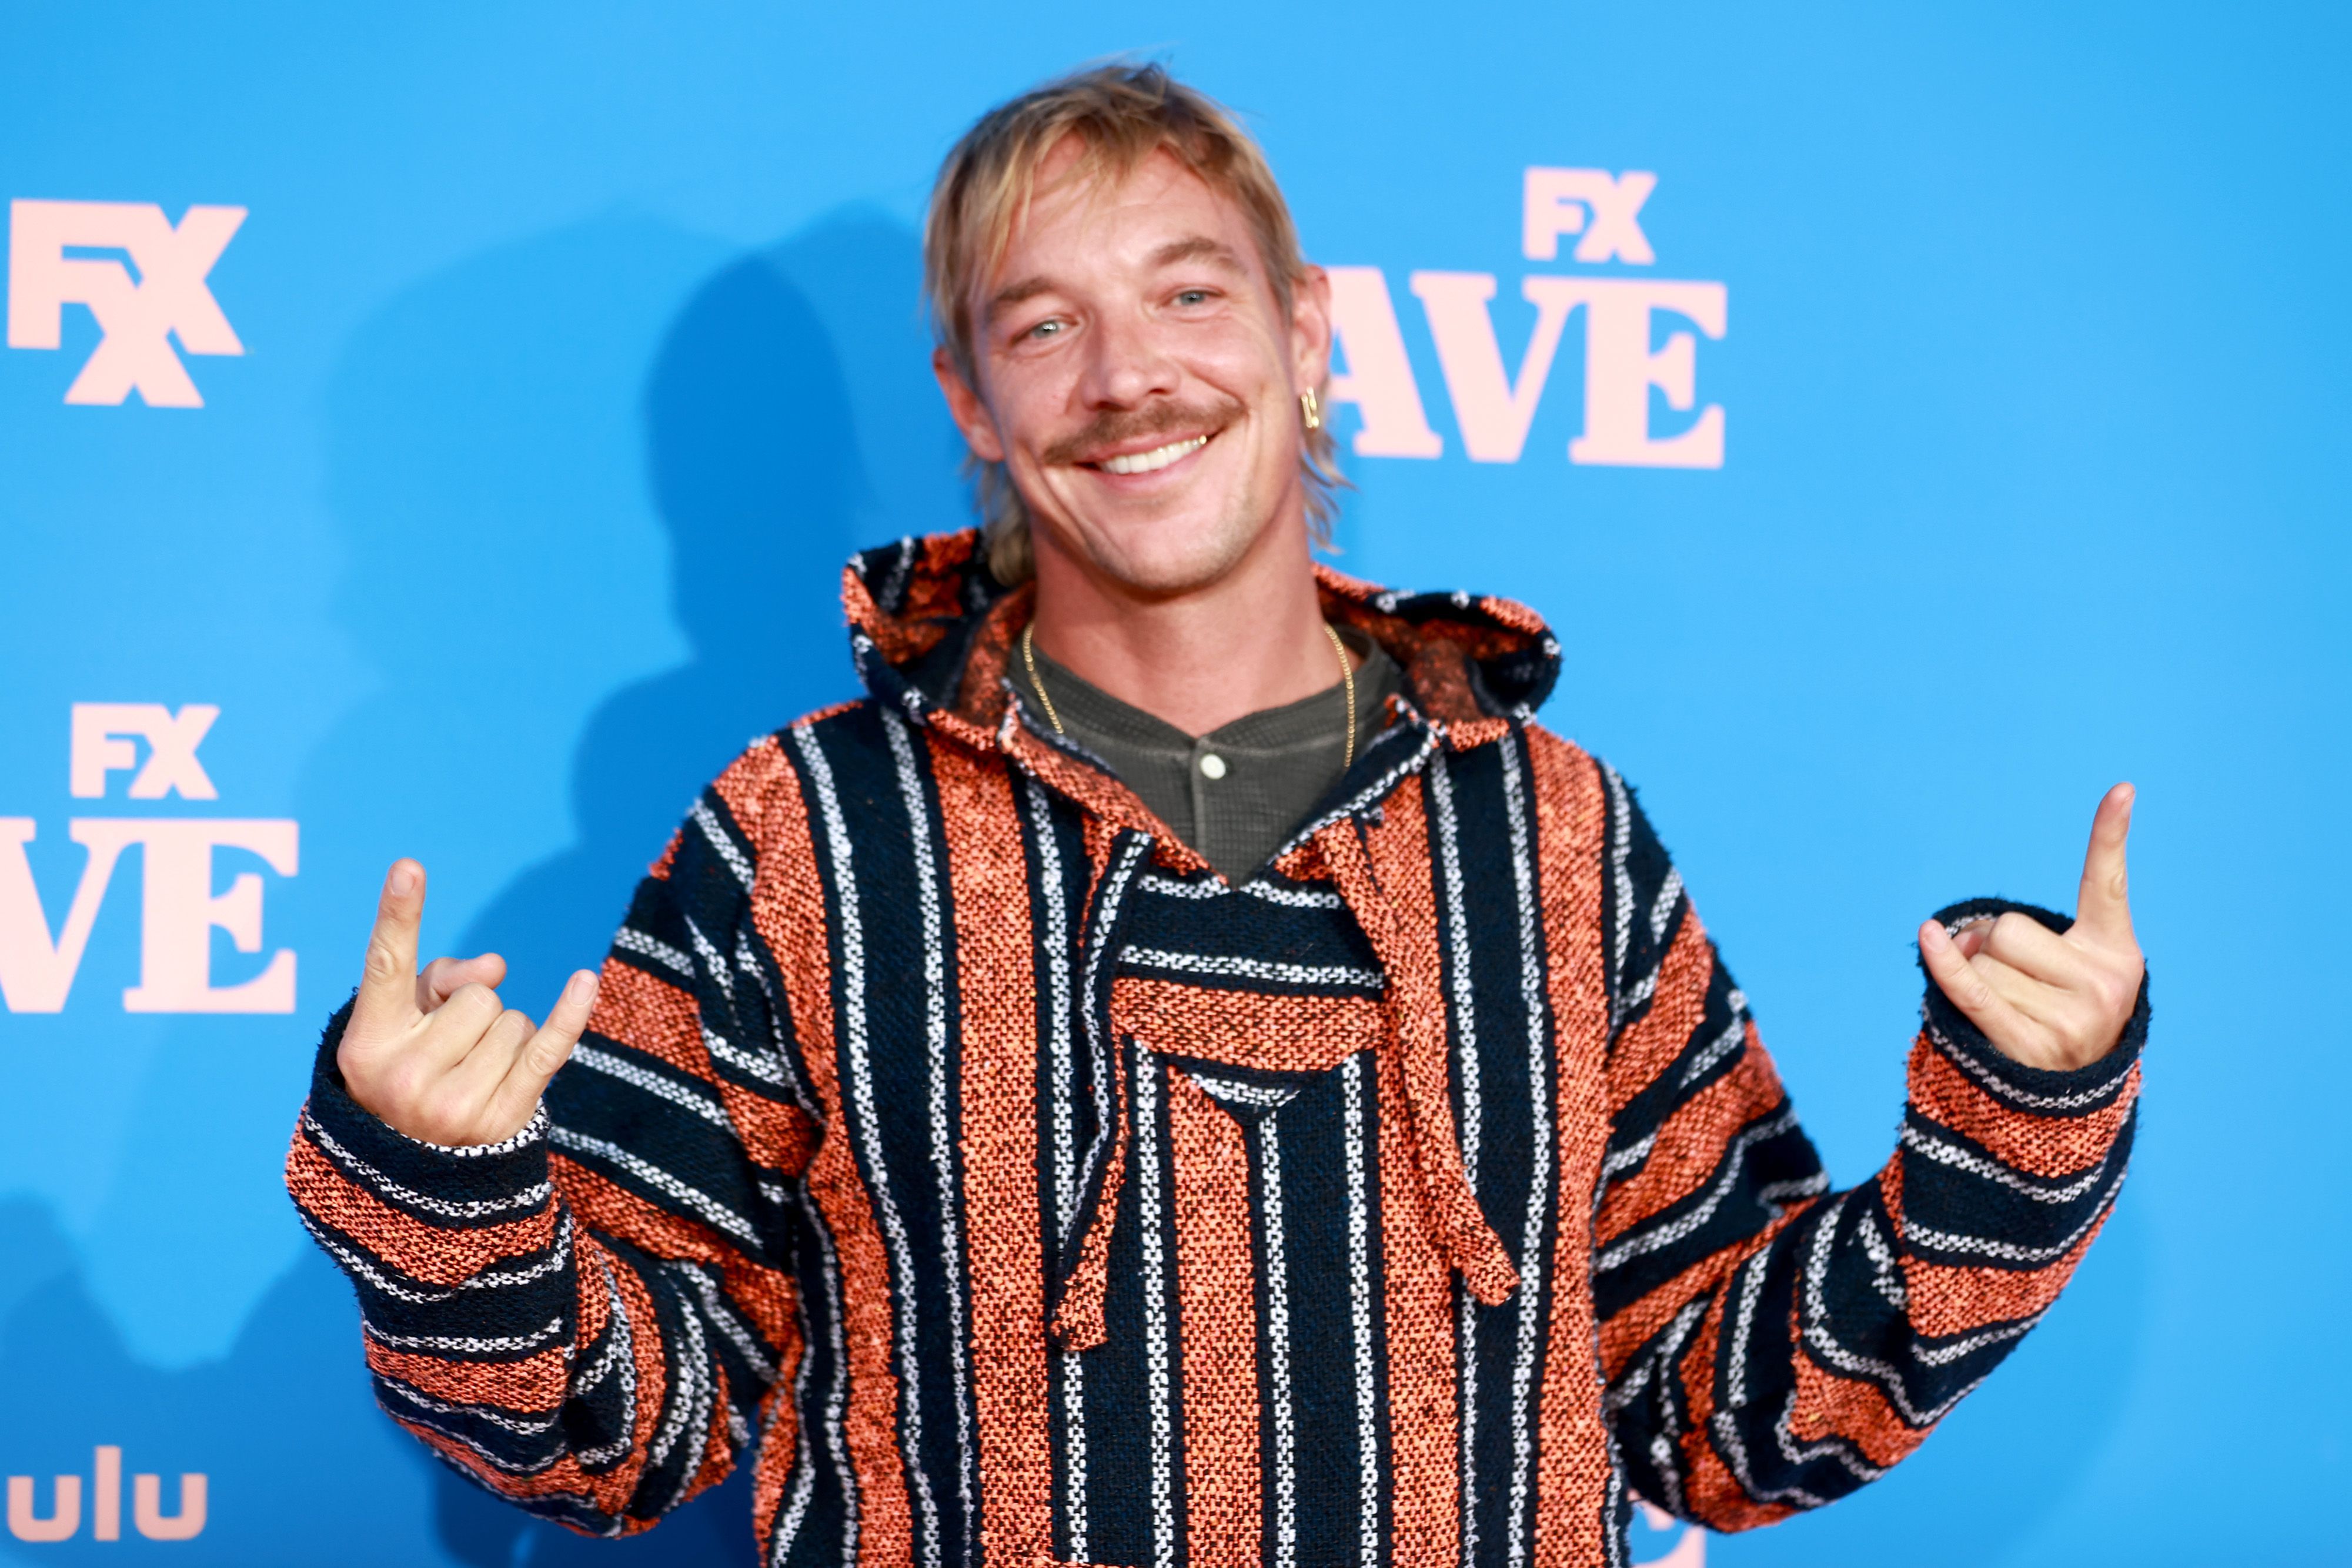 Diplo attends FXX, FX and Hulu's Season 2 Red Carpet Premiere Of "Dave" at The Greek Theatre